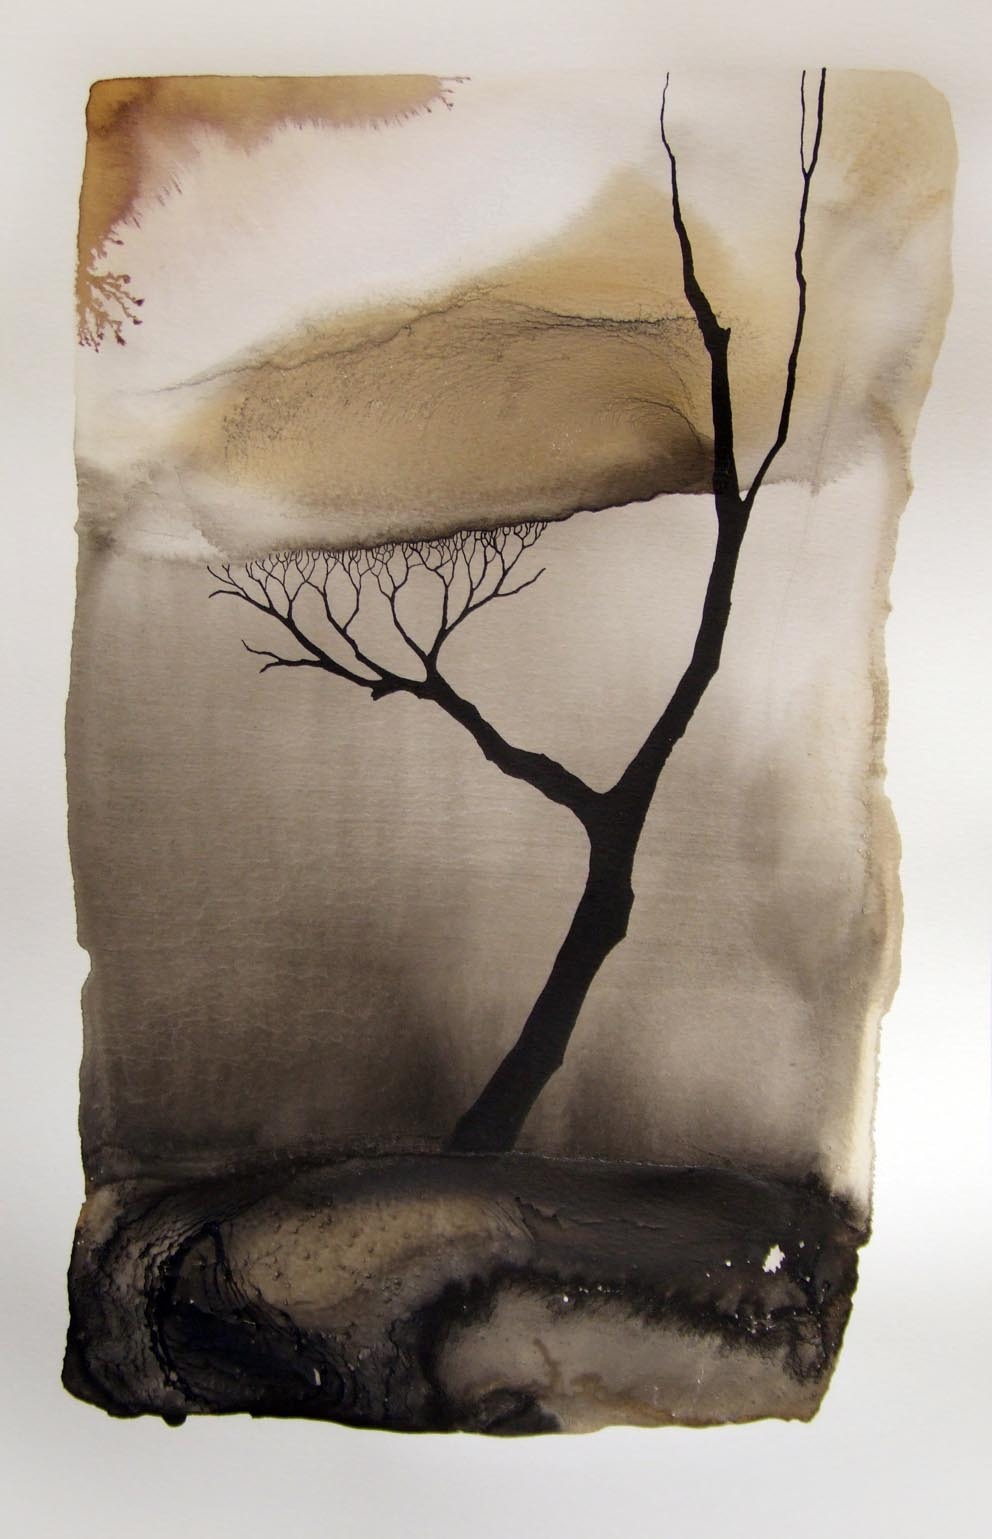 Pablo S. Herrero: Images of drought
Chinese ink and white clay on paper